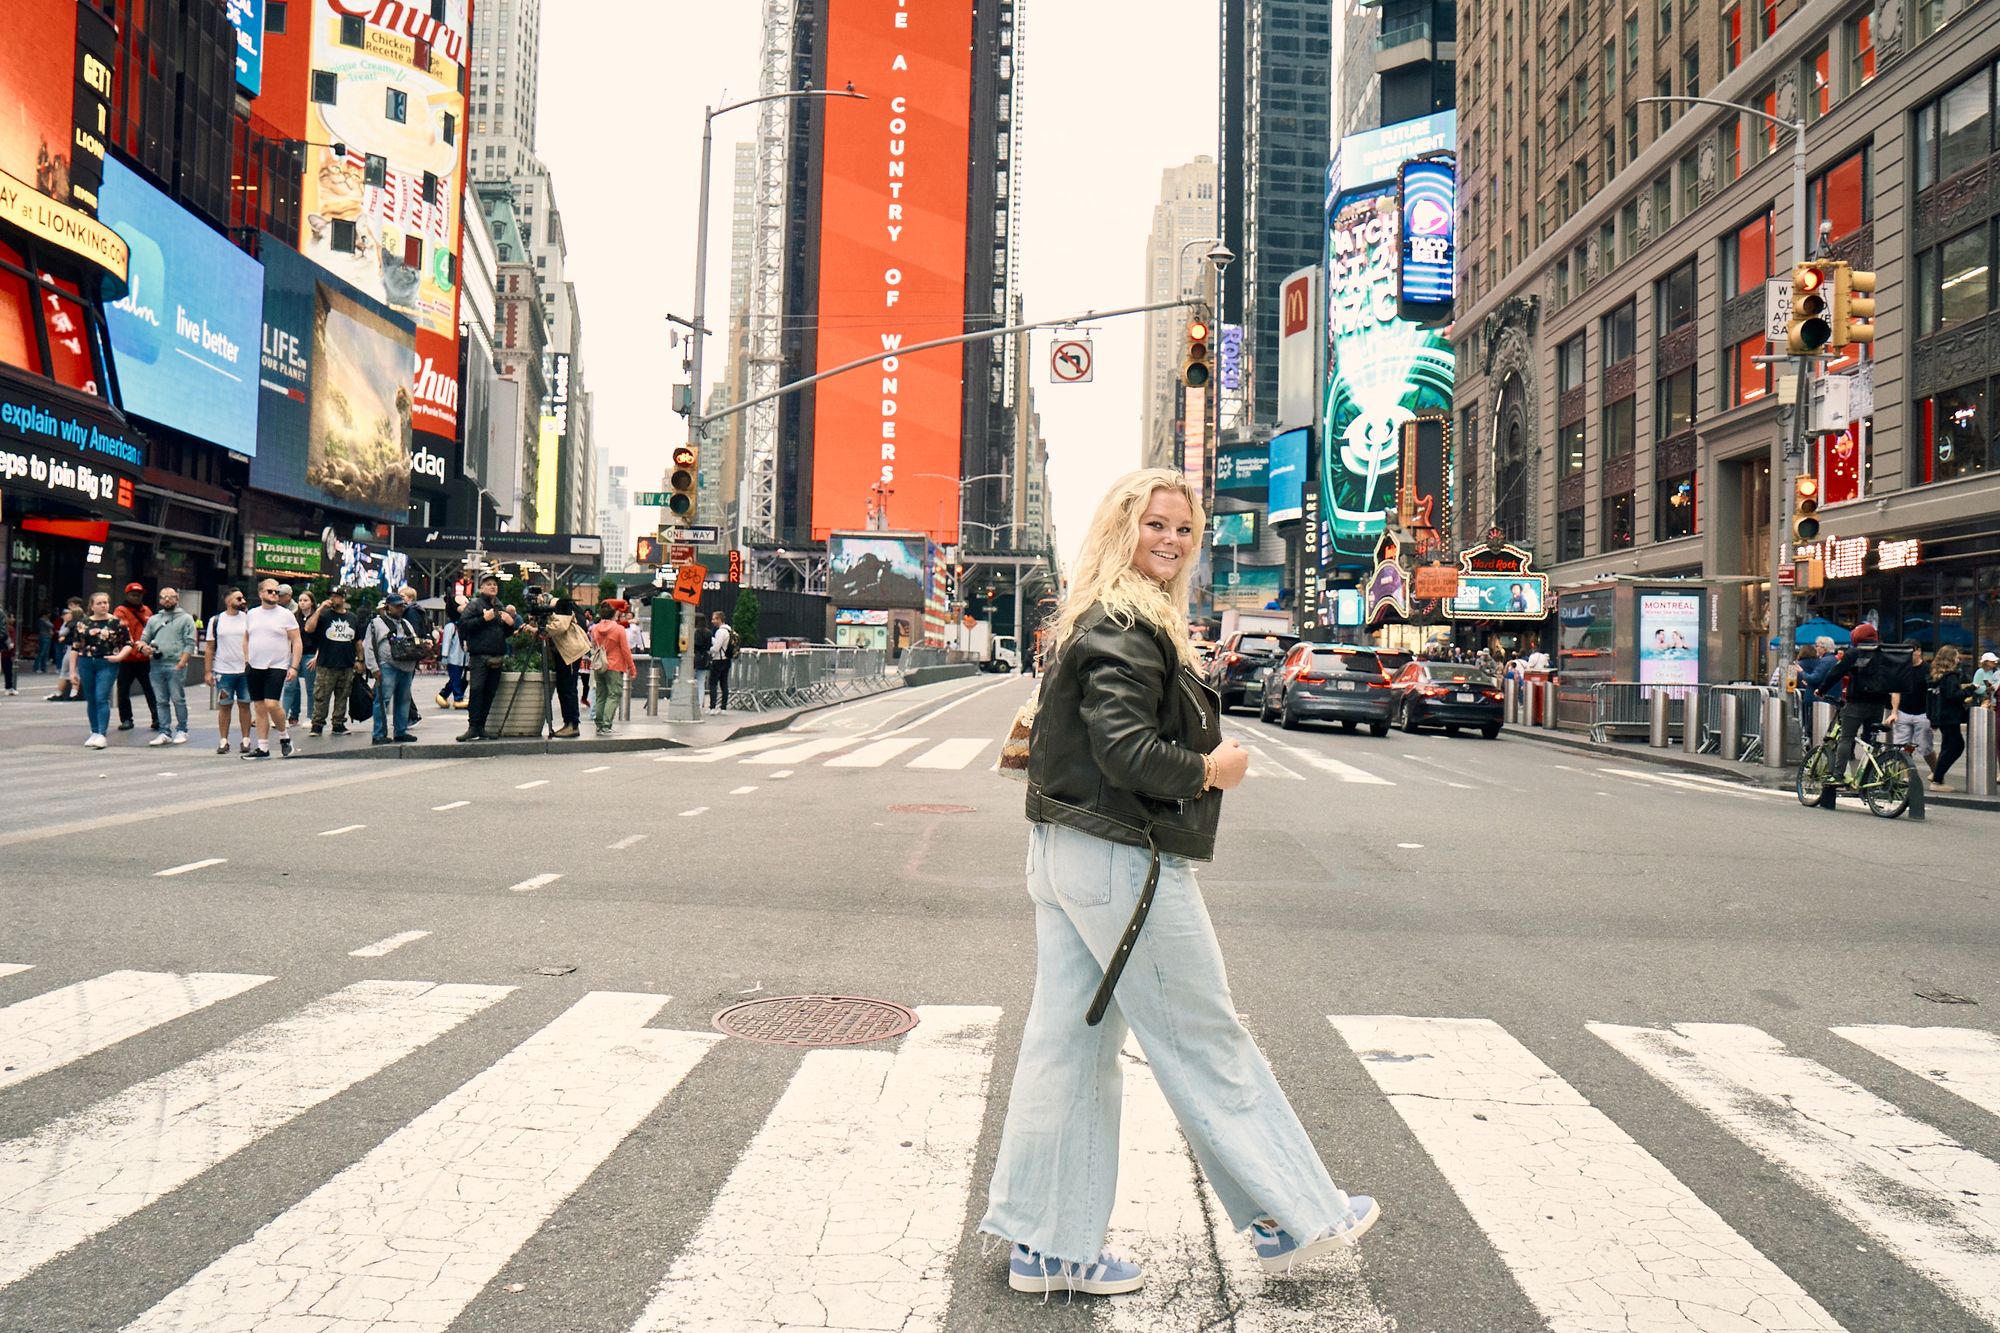 Woman using zebra crossing in Times Square